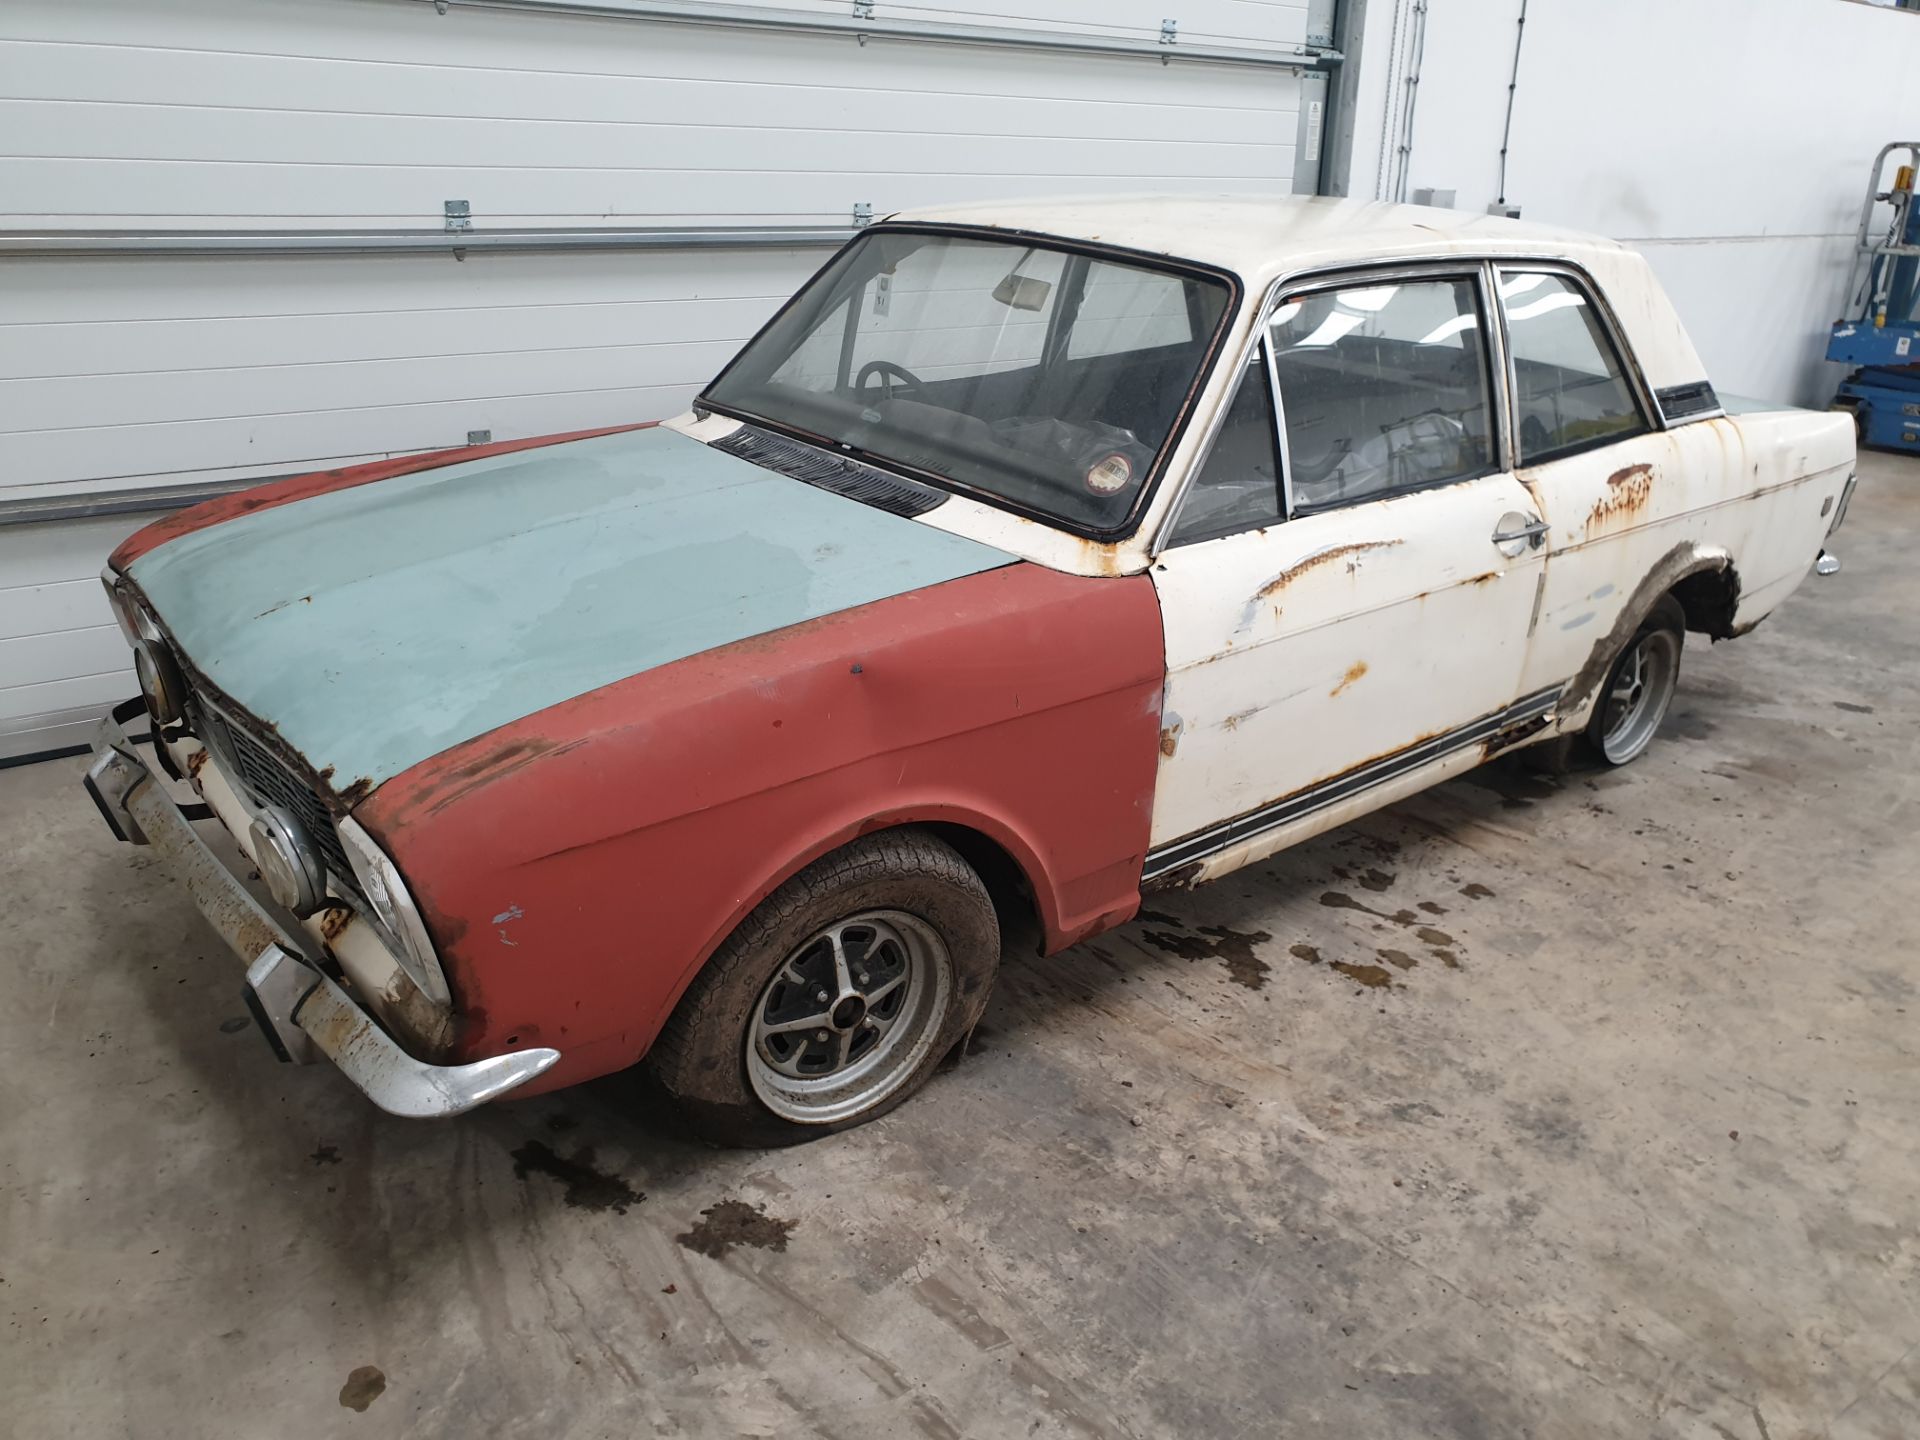 Ford Cortina 1600 GT 2 dr - Image 7 of 11